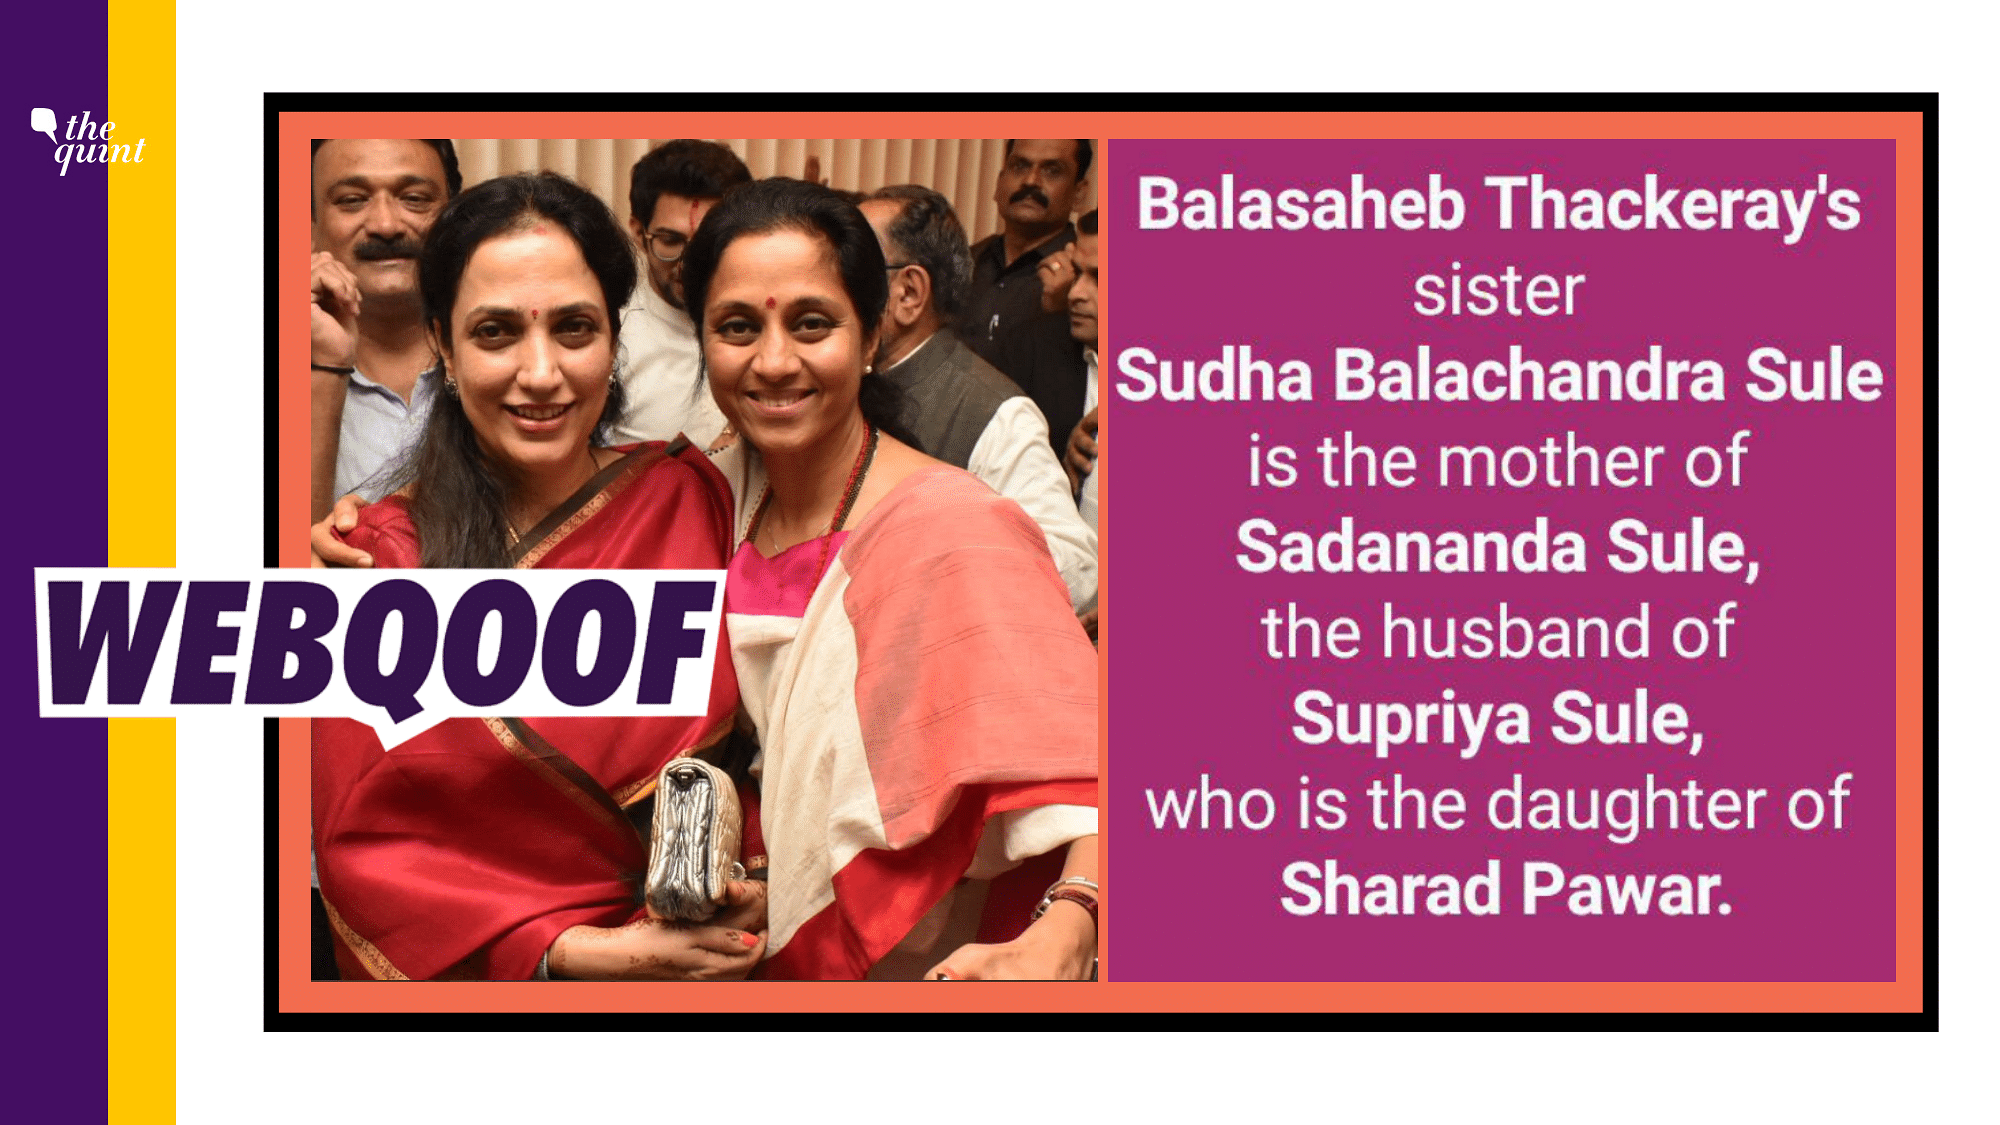 An image falsely claimed that NCP leader Supriya Sule is the daughter-in-law of Bal Thackeray’s sister.